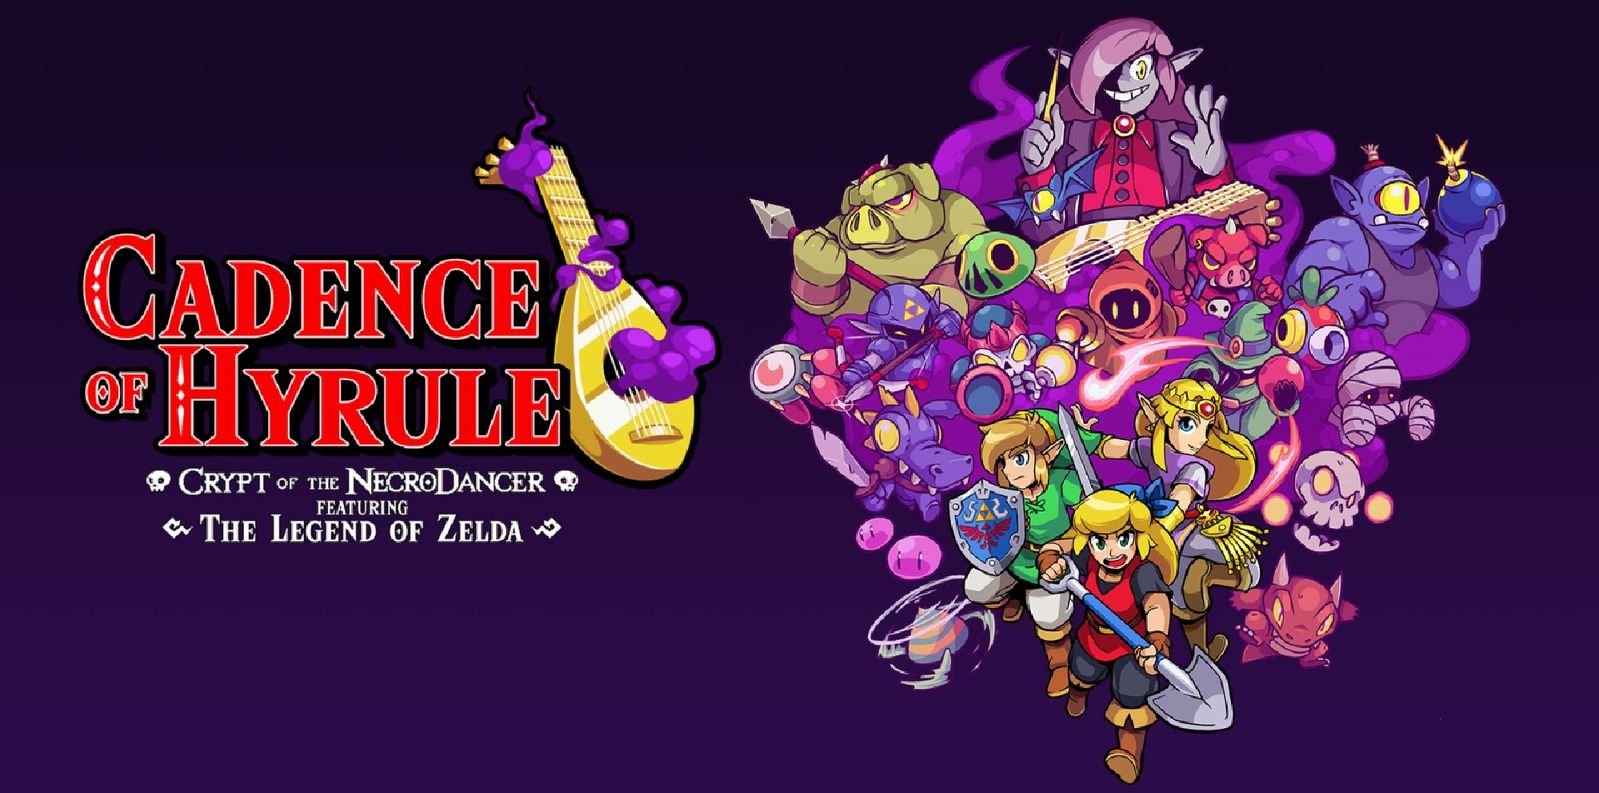 Game image of Cadence of Hyrule featuring multiple video game characters, including Link, on a purple background.